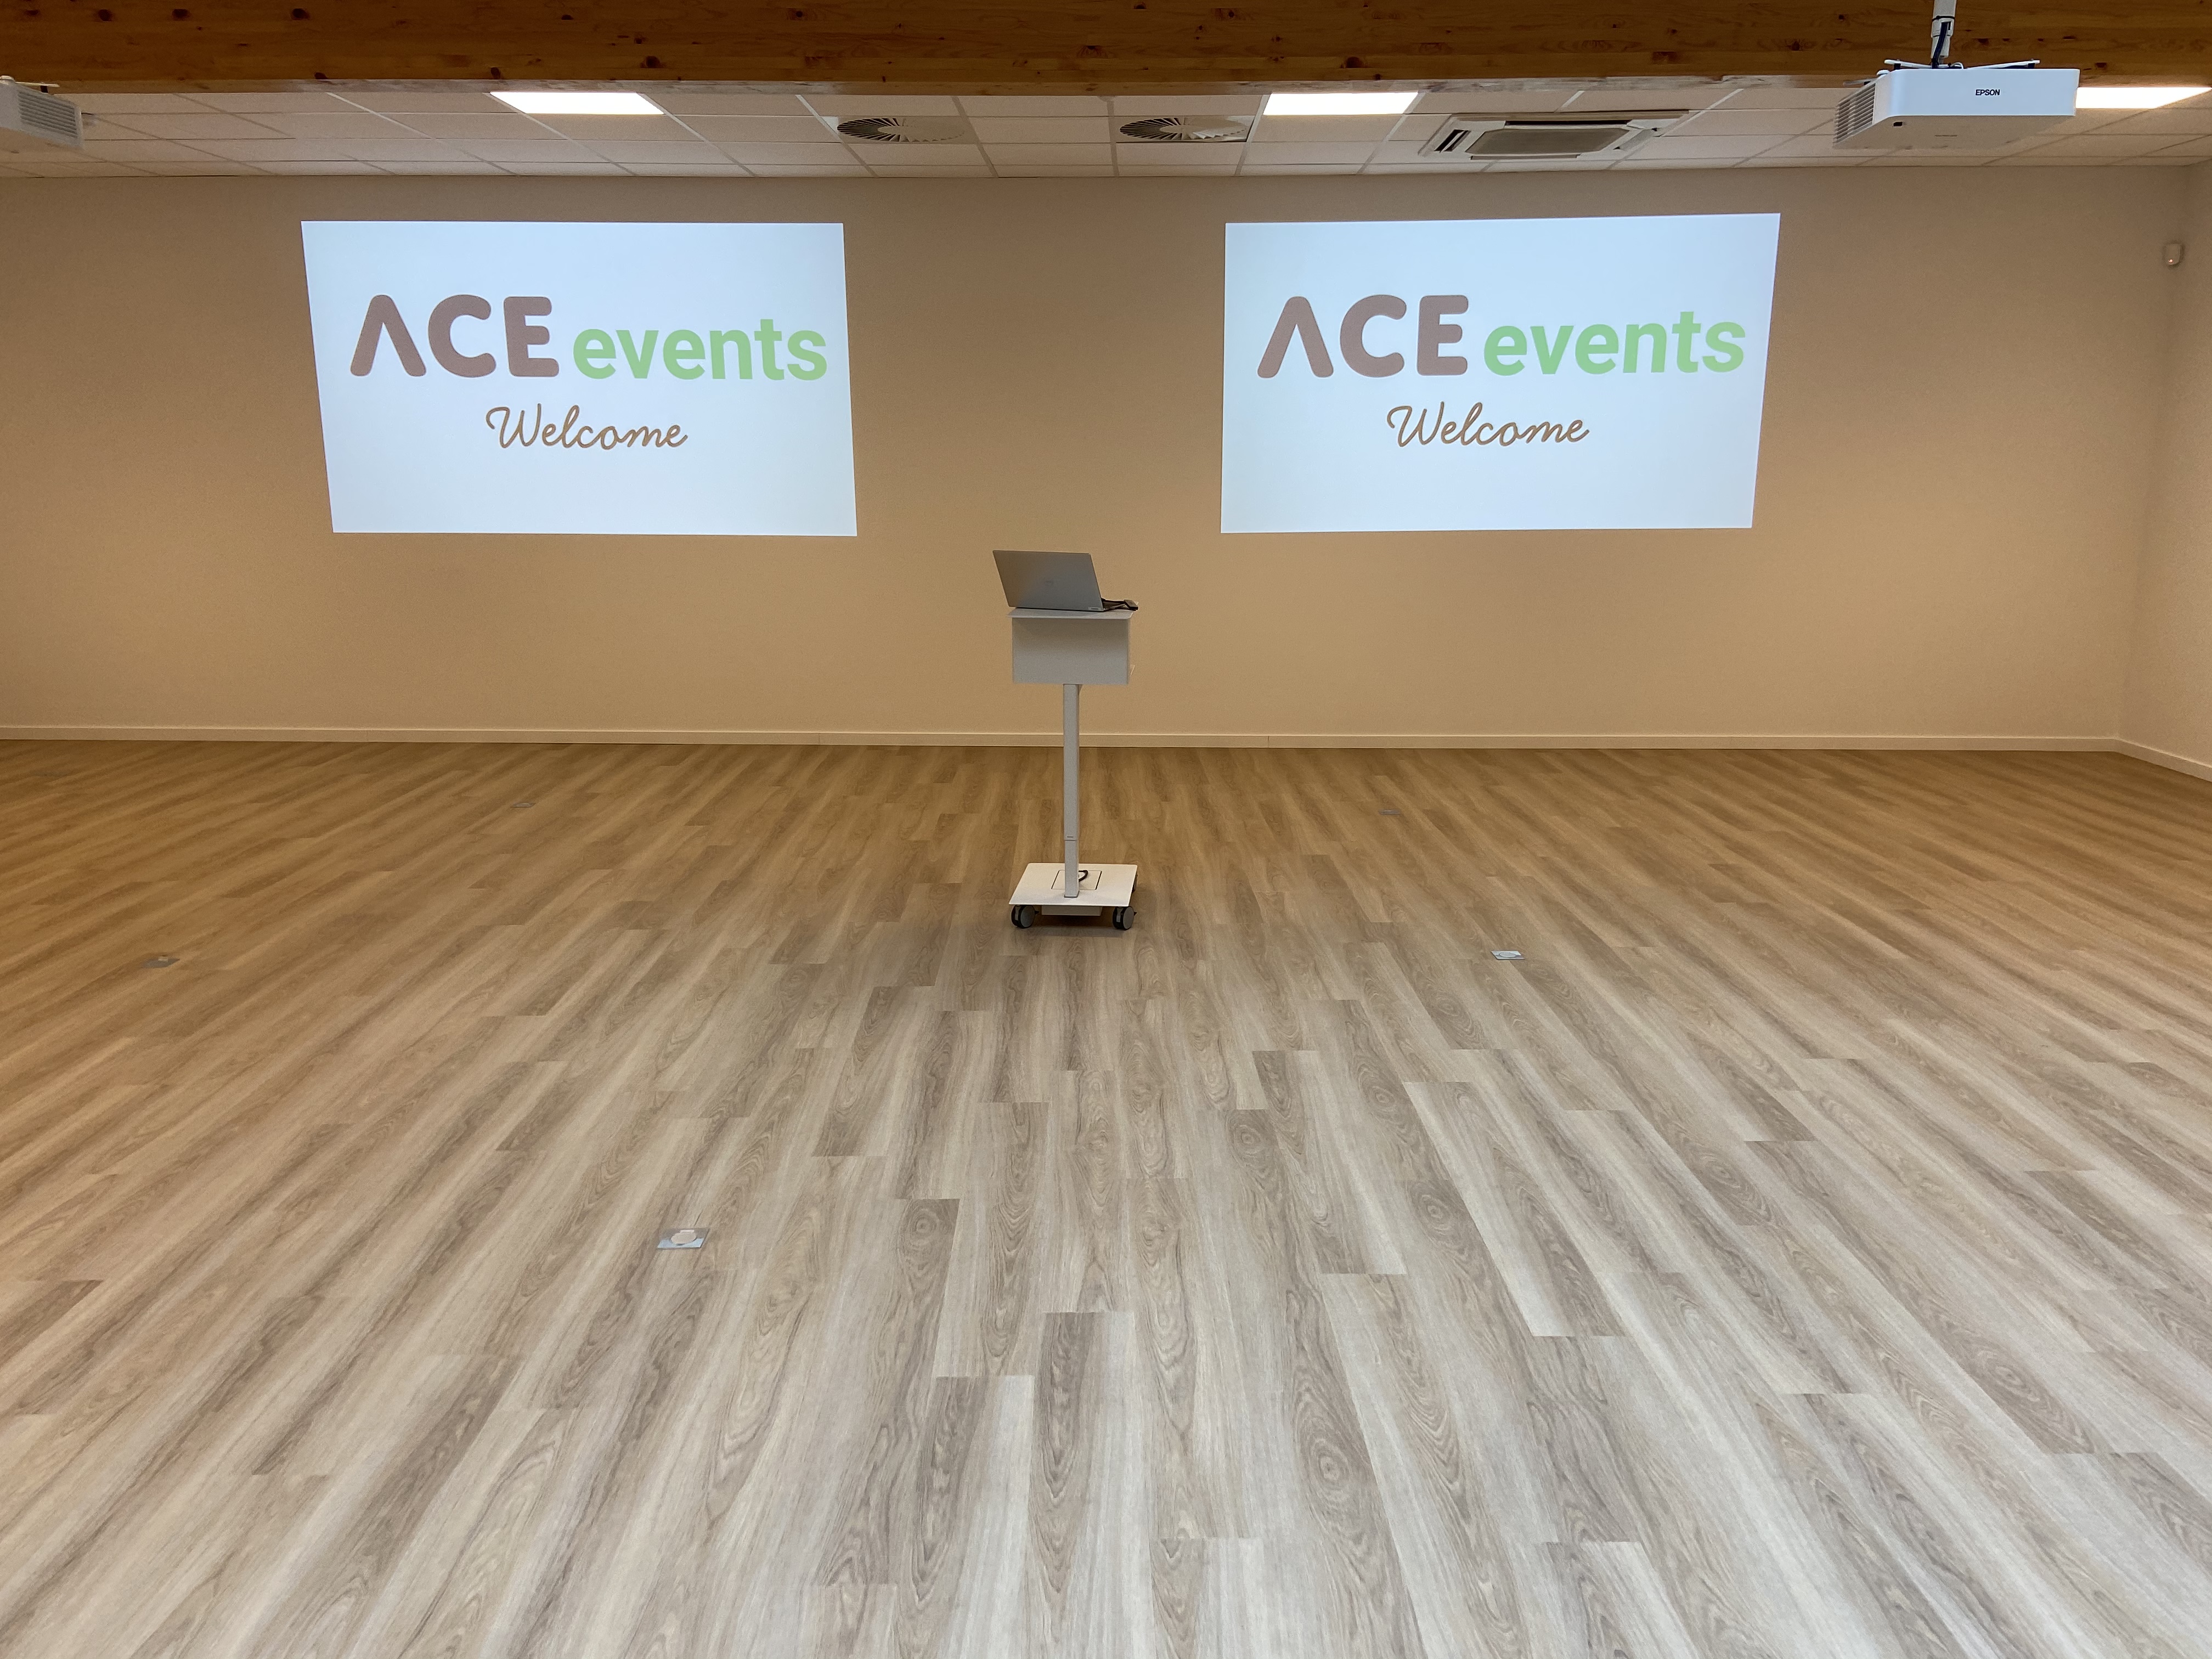 ACE events